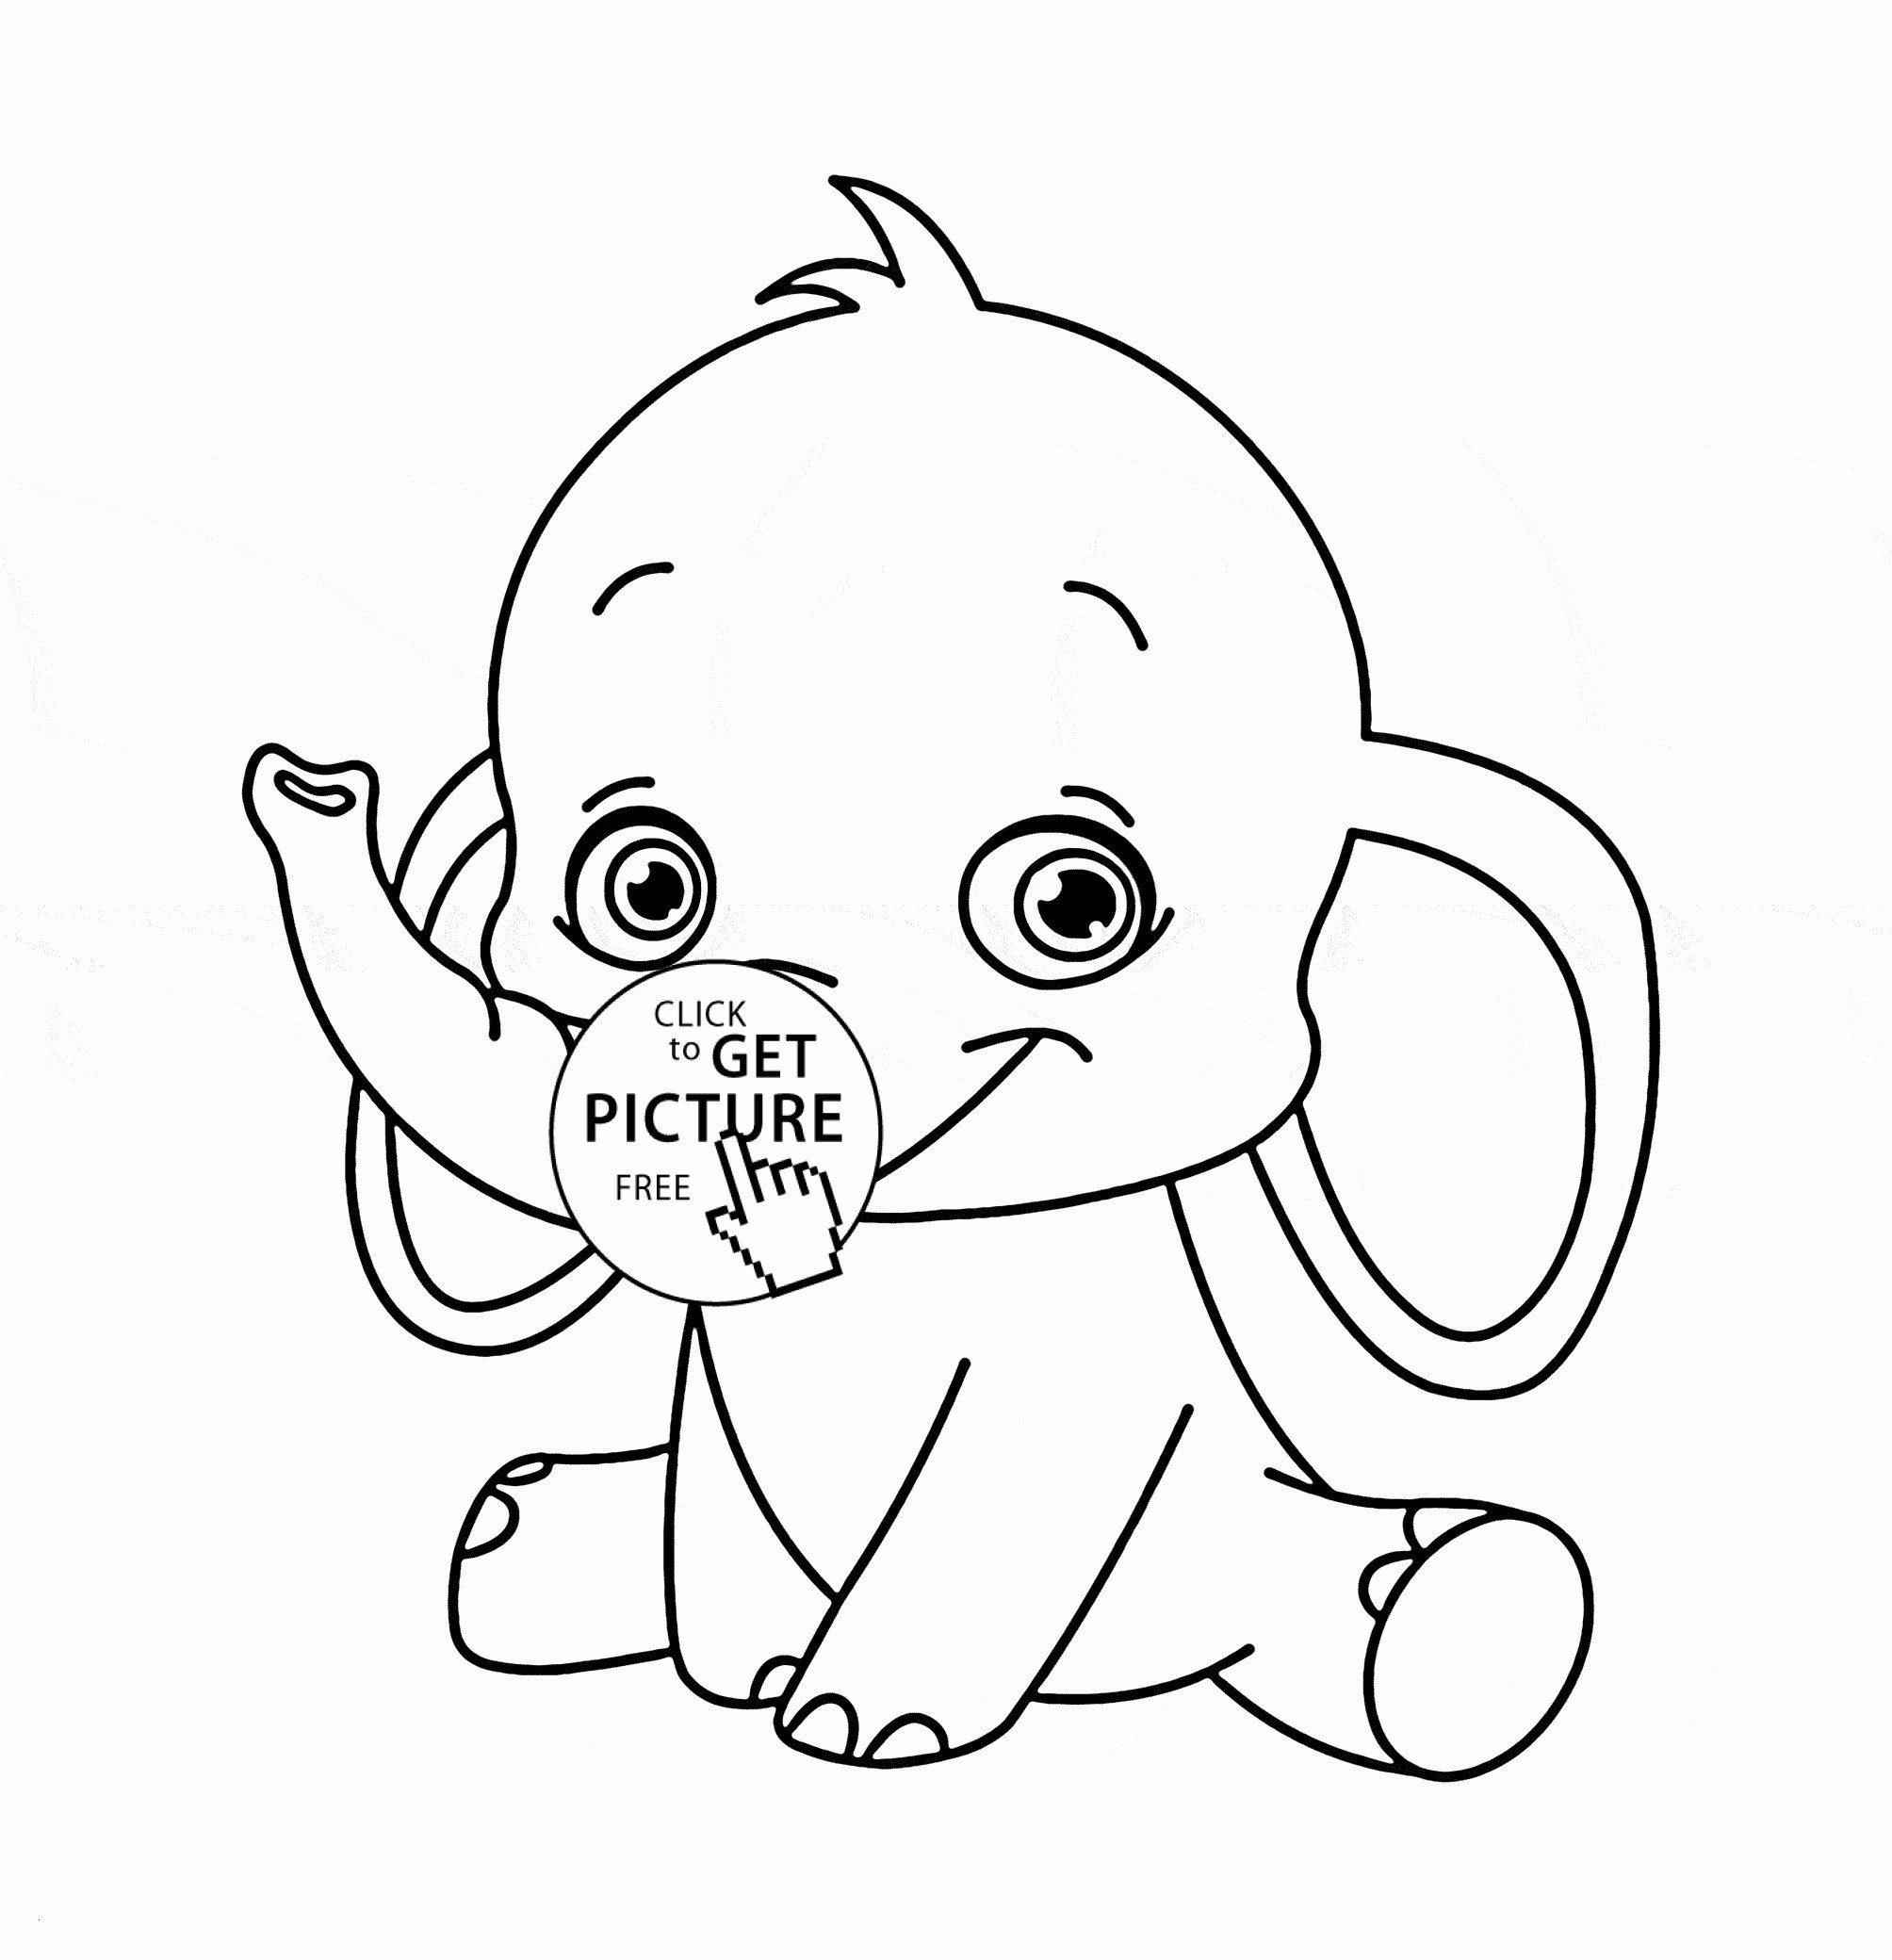 elephant coloring pages beautiful lovely elephant coloring pages printable letramac of elephant coloring pages